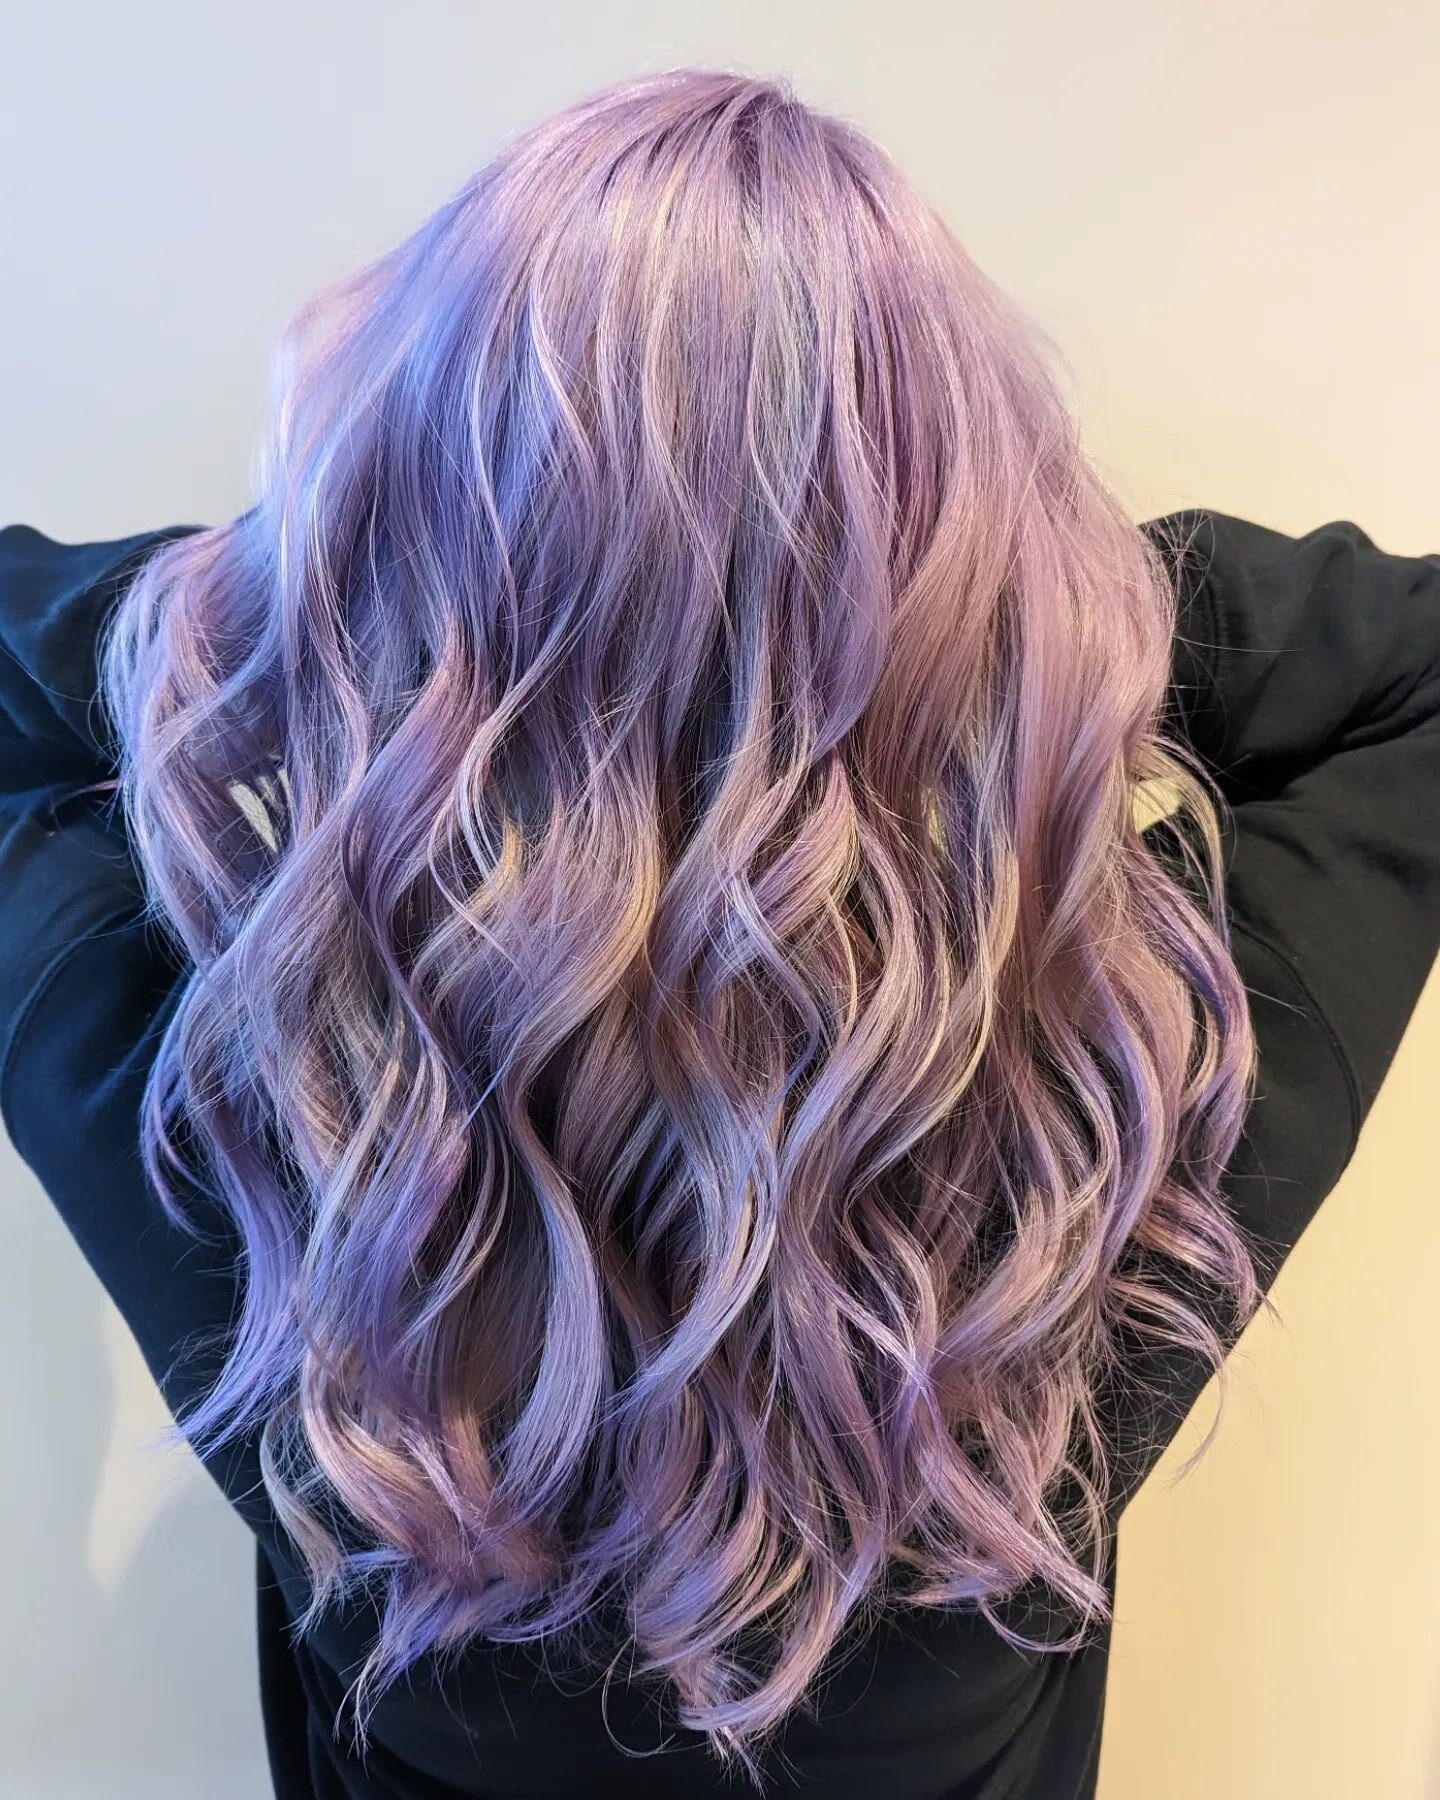 These Beautiful Ice and Lilac Ribbons, took a good 5 hours of Color Correction!
&bull; 
I tried to race the Sun going down to get natural lighting, it's not the best indoor lighting but I couldn't pass up these Before and After pics! 😲 
&bull;
SWIPE